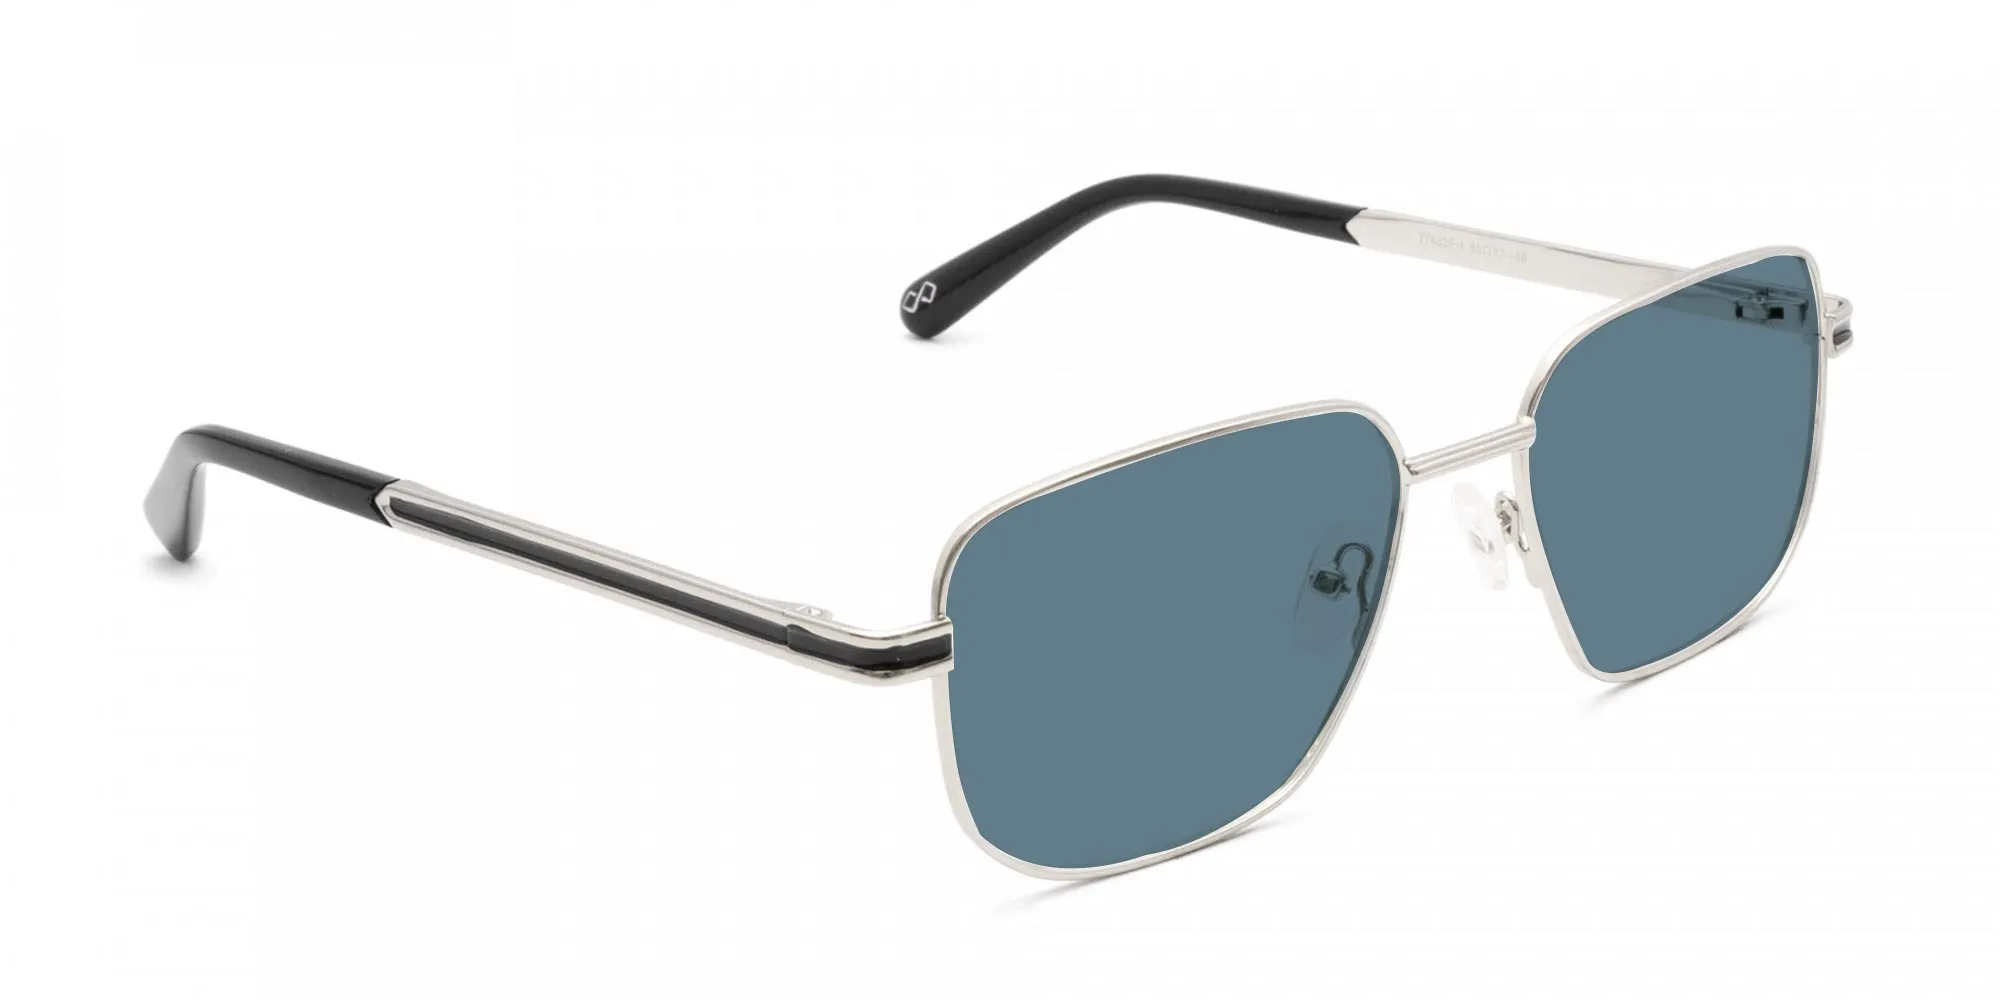 GLAZEBURRY 4-S3 - Silver Metal Sunglasses With Blue Tint | Specscart.®